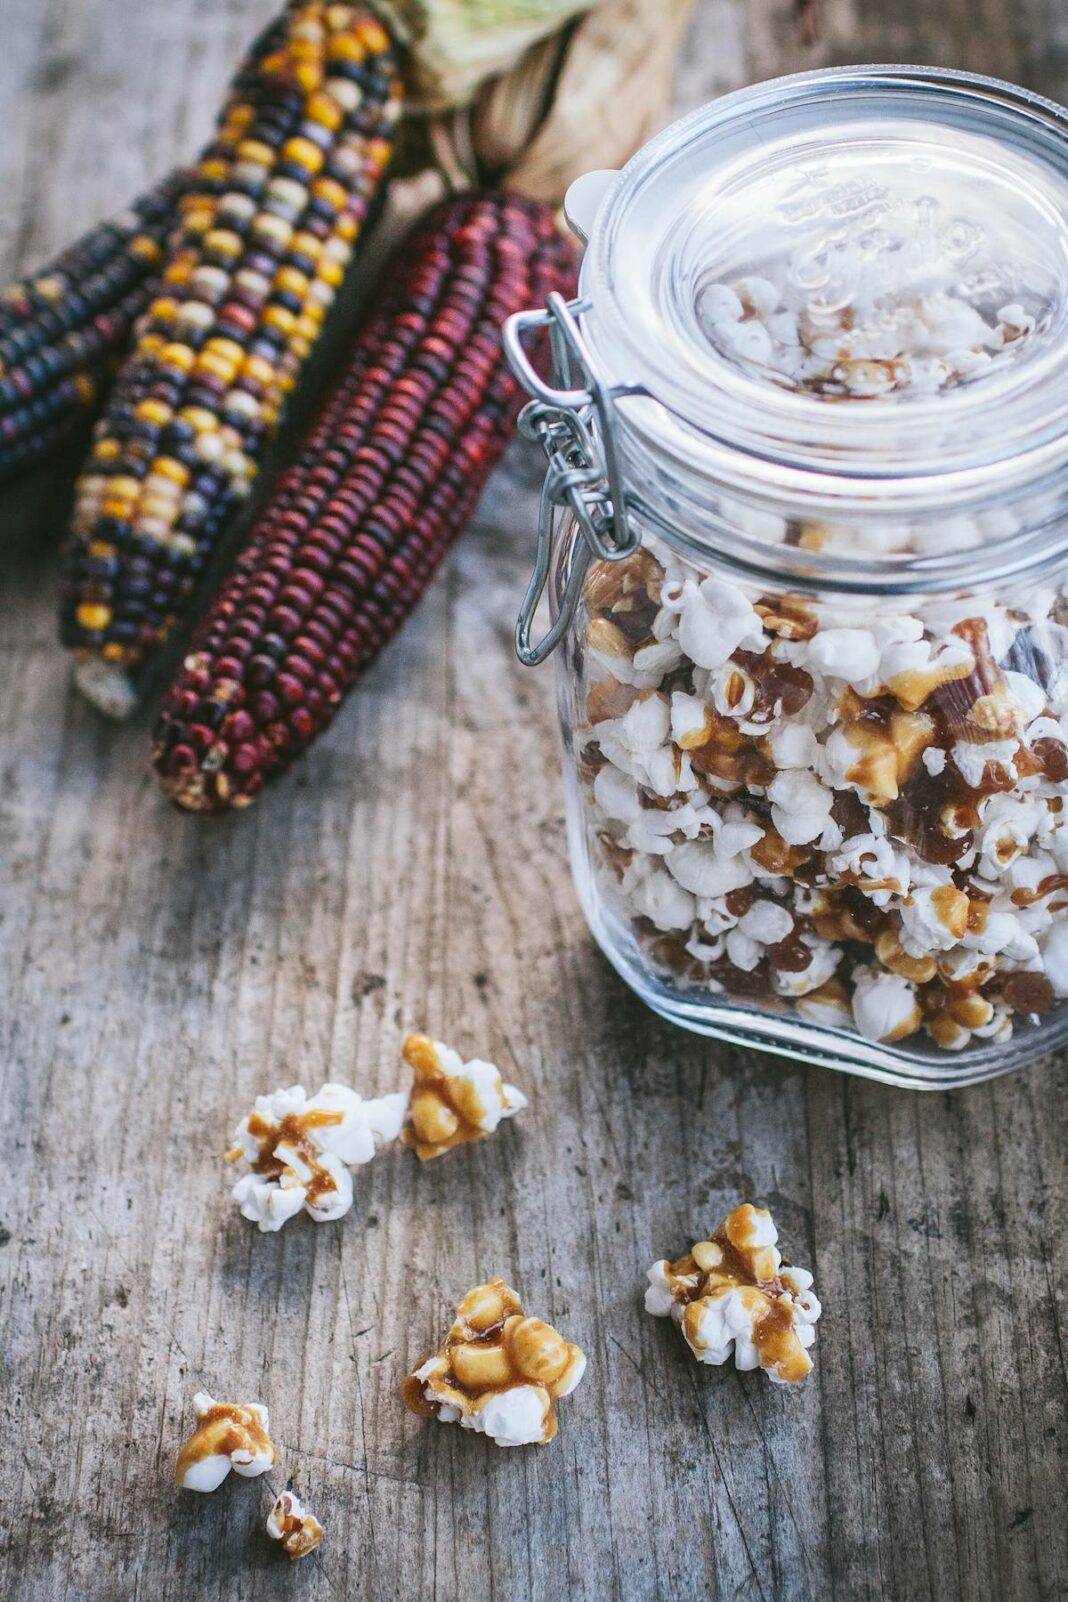 Maple Caramel Corn in a jar with Indian Corn next to it on the table